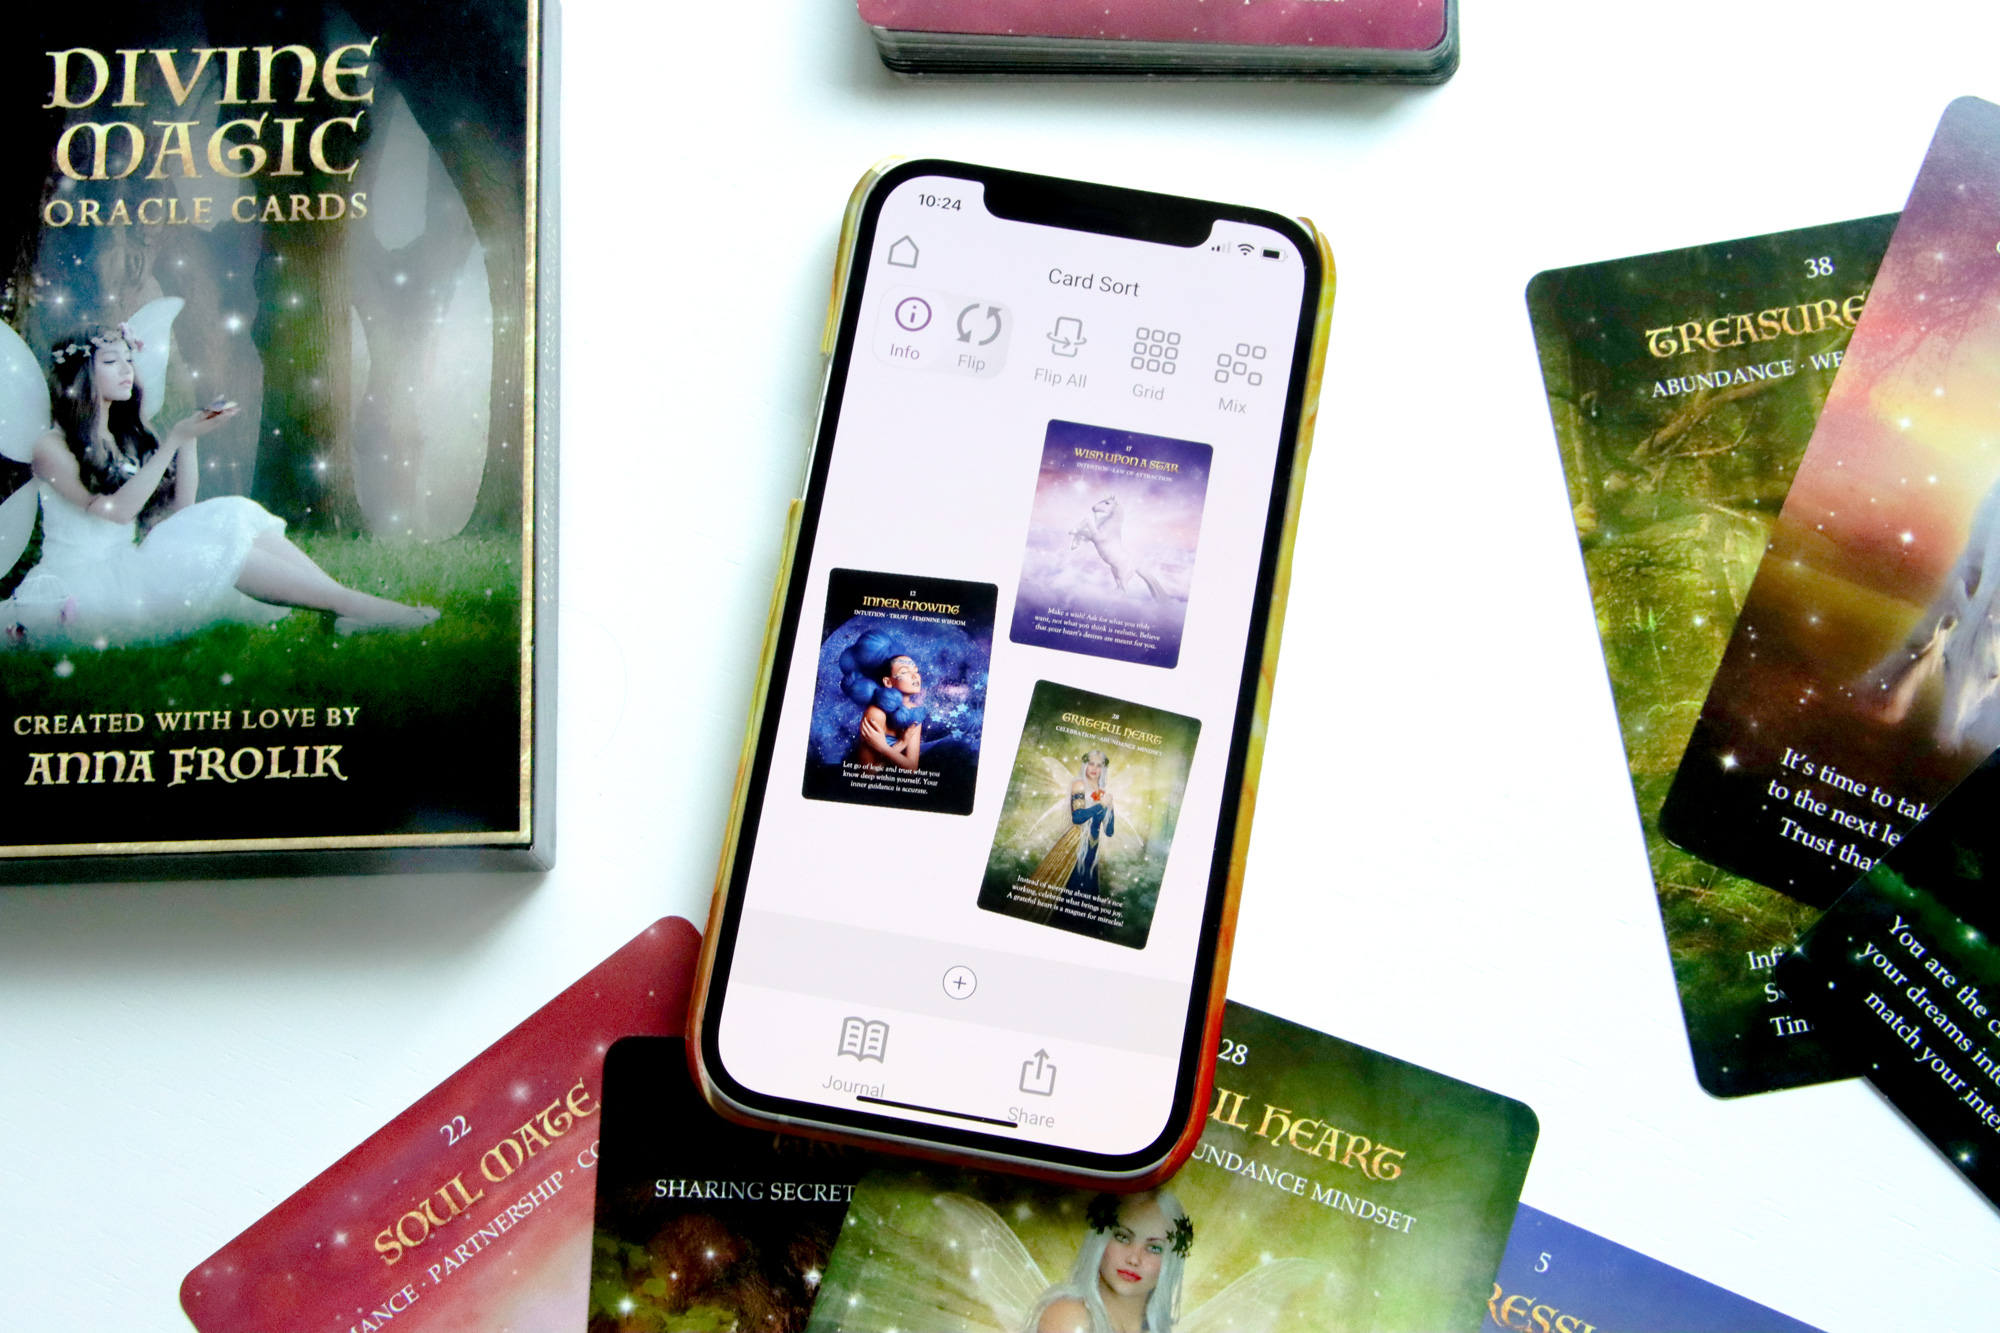 Publishing Your Own Digital Oracle Card Deck